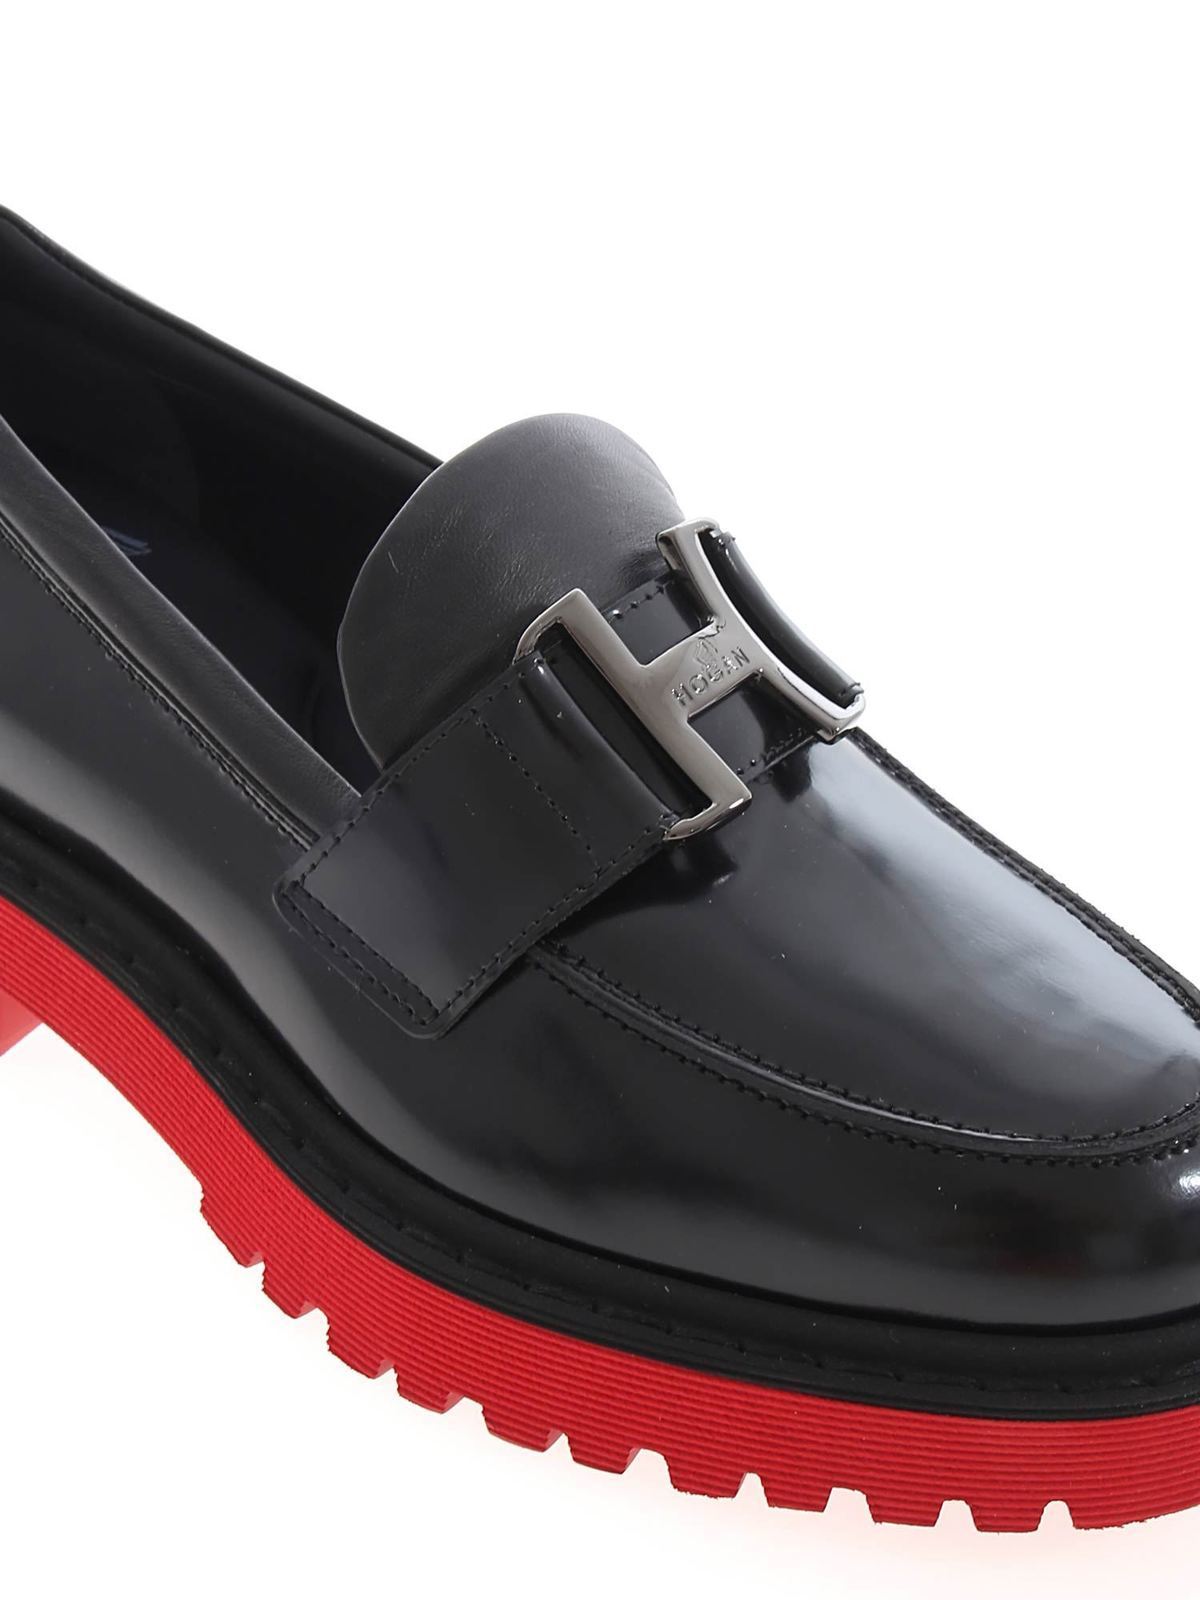 Loafers & Slippers Hogan - H543 loafers in black - HXW5430DV70QC79999